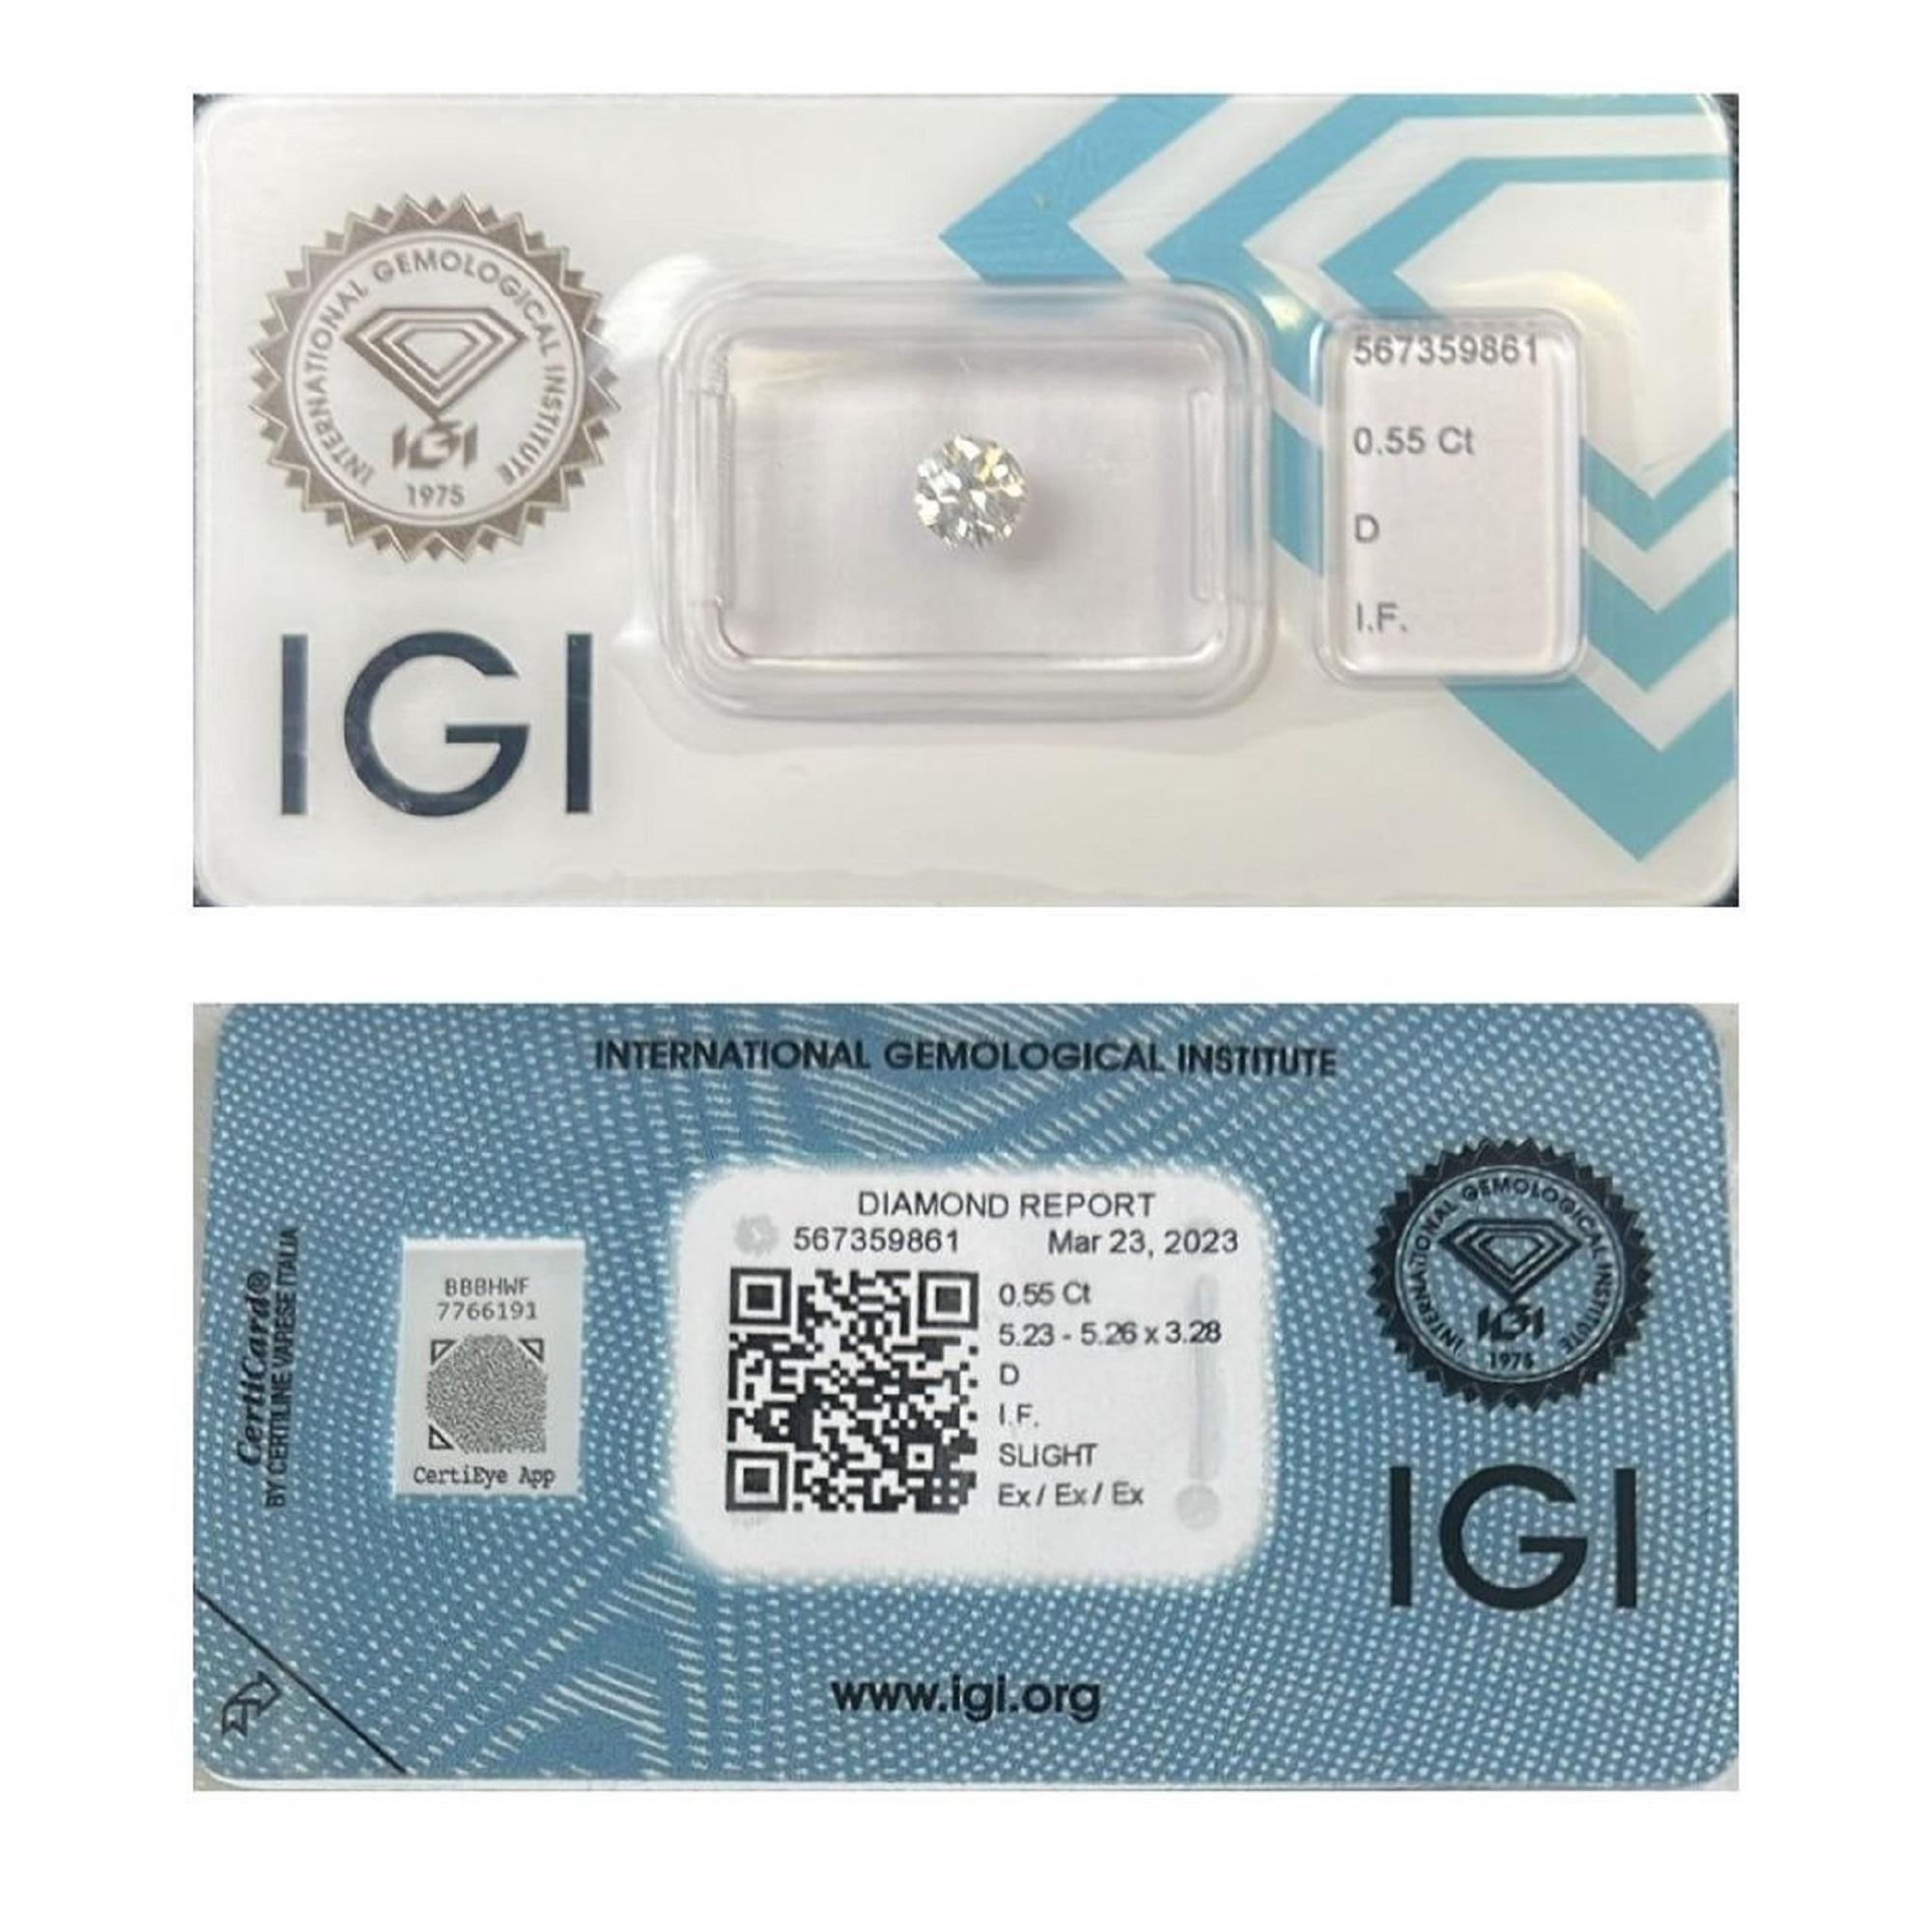 Sparkling 1pc Natural Diamond w/ 0.55 ct Round D IF IGI Certificate For Sale 1